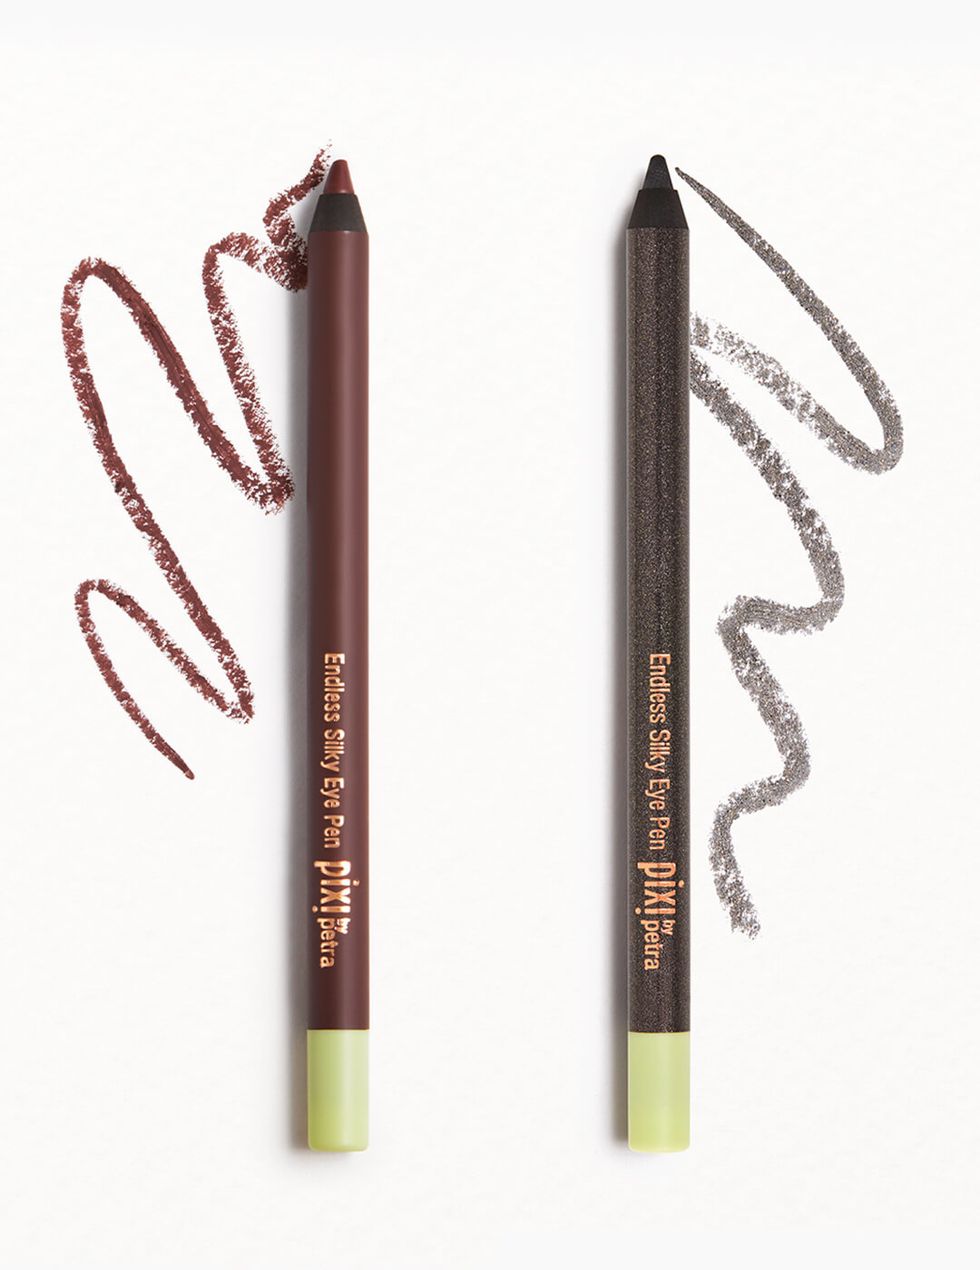 PIXI BY PETRA Endless Silky Eye Pen in Matte Mulberry and Jeweled Pewter